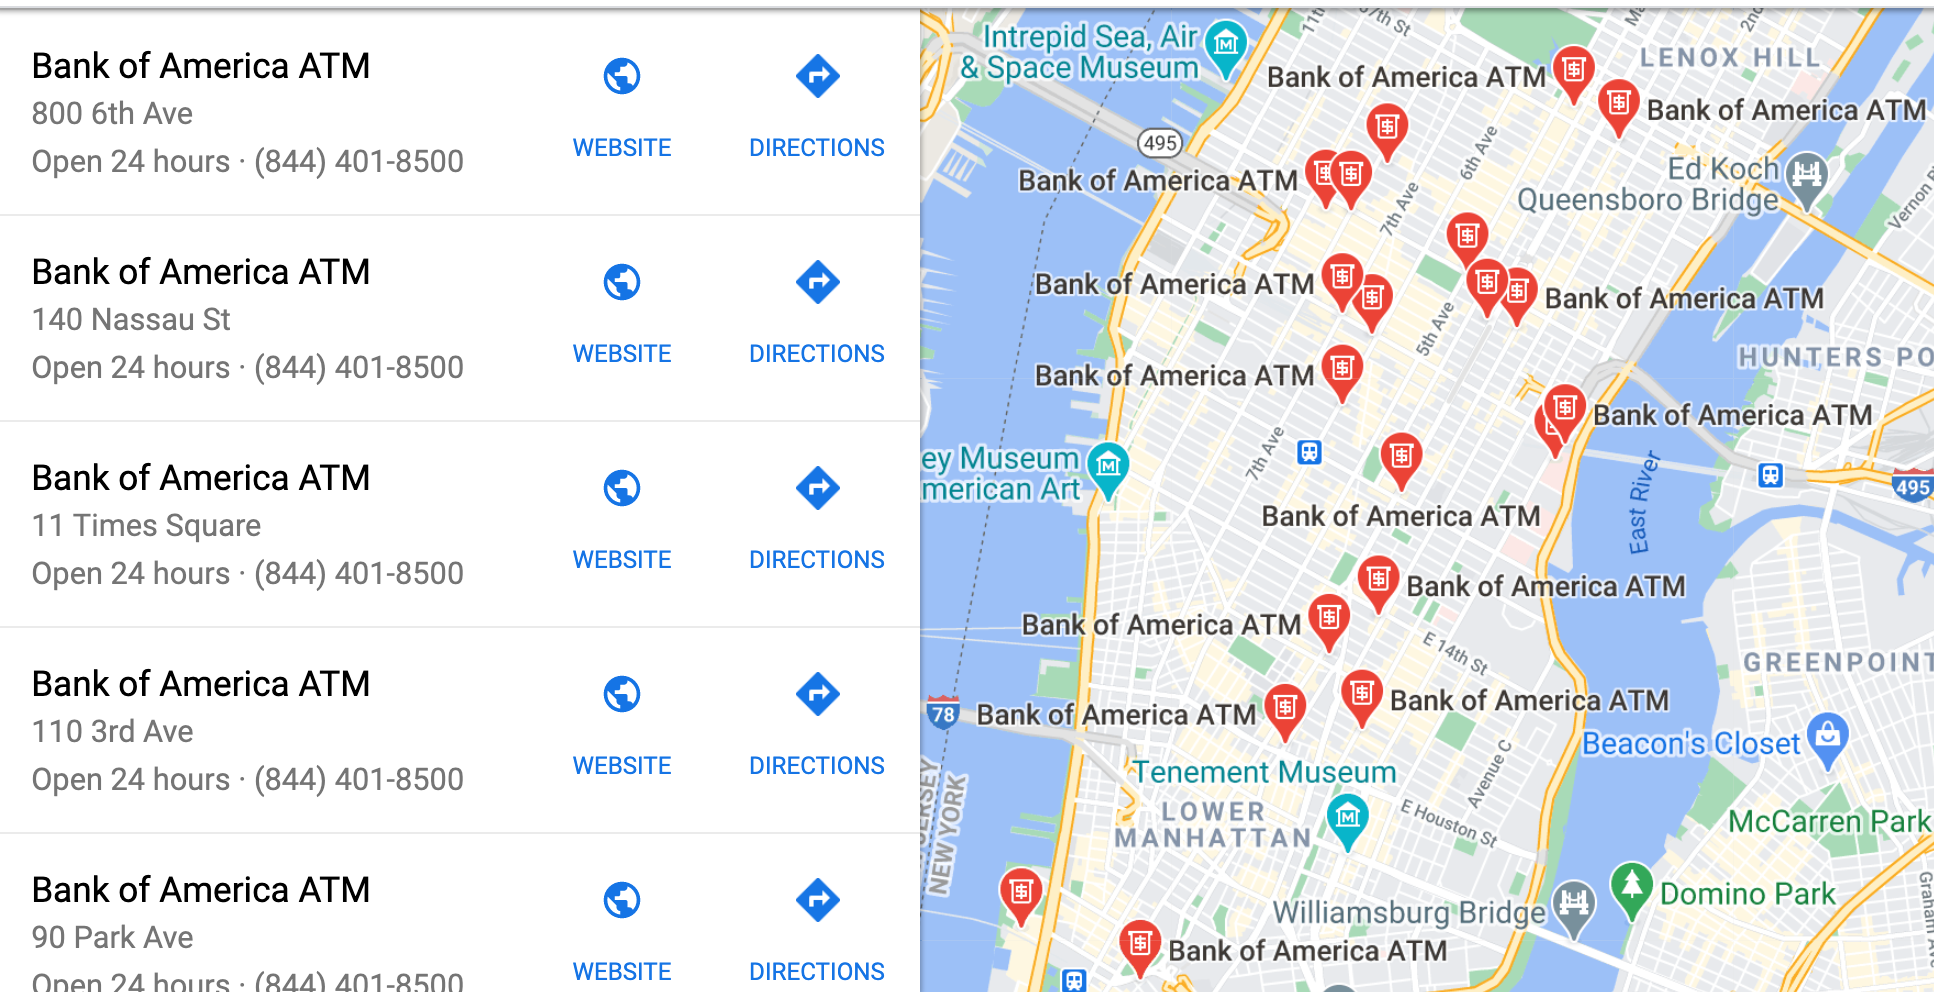 bank-of-america-atm-locations-nyc